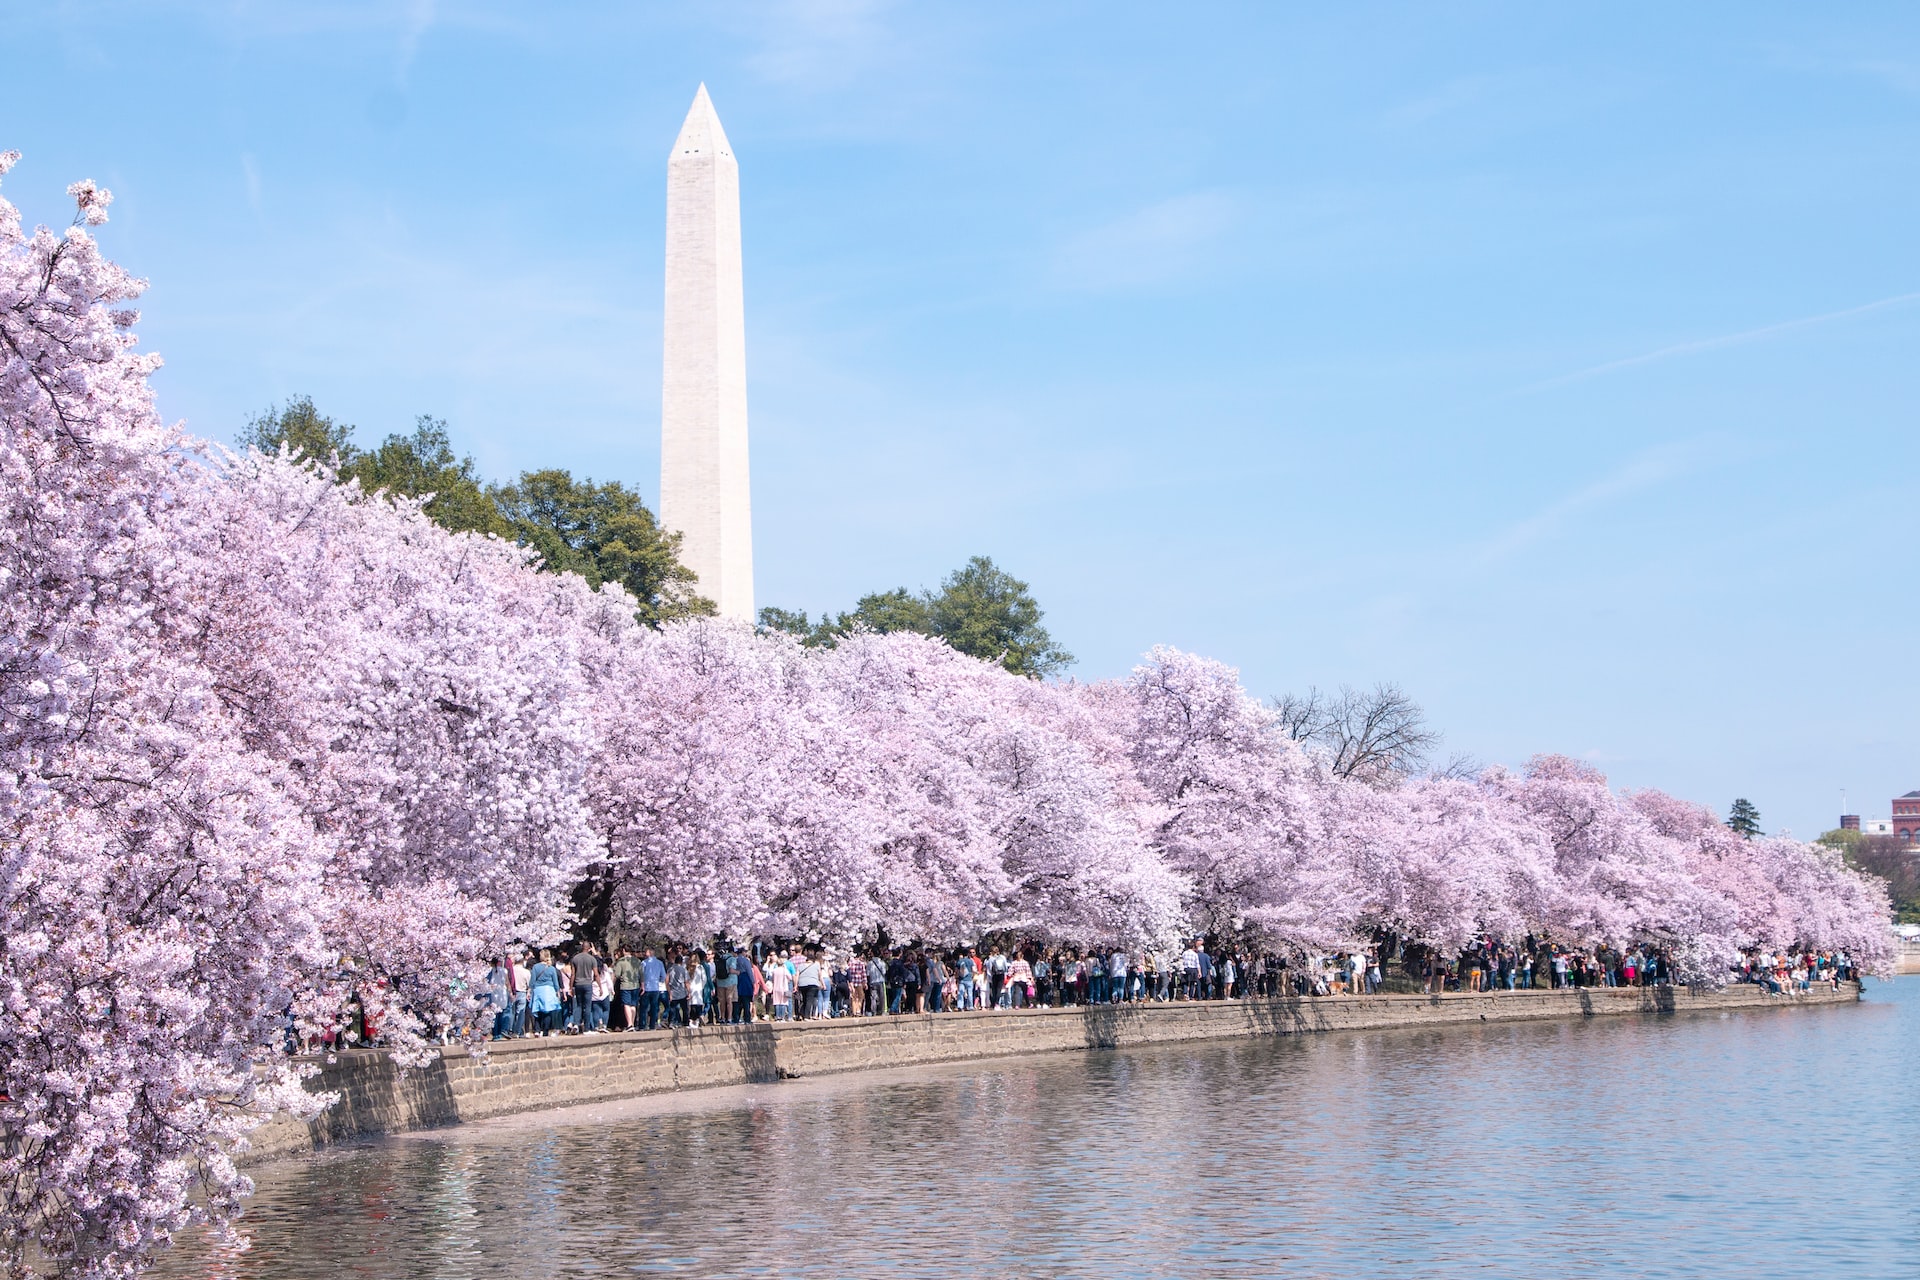 Cherry blossoms along the water beside the Washington Monument.